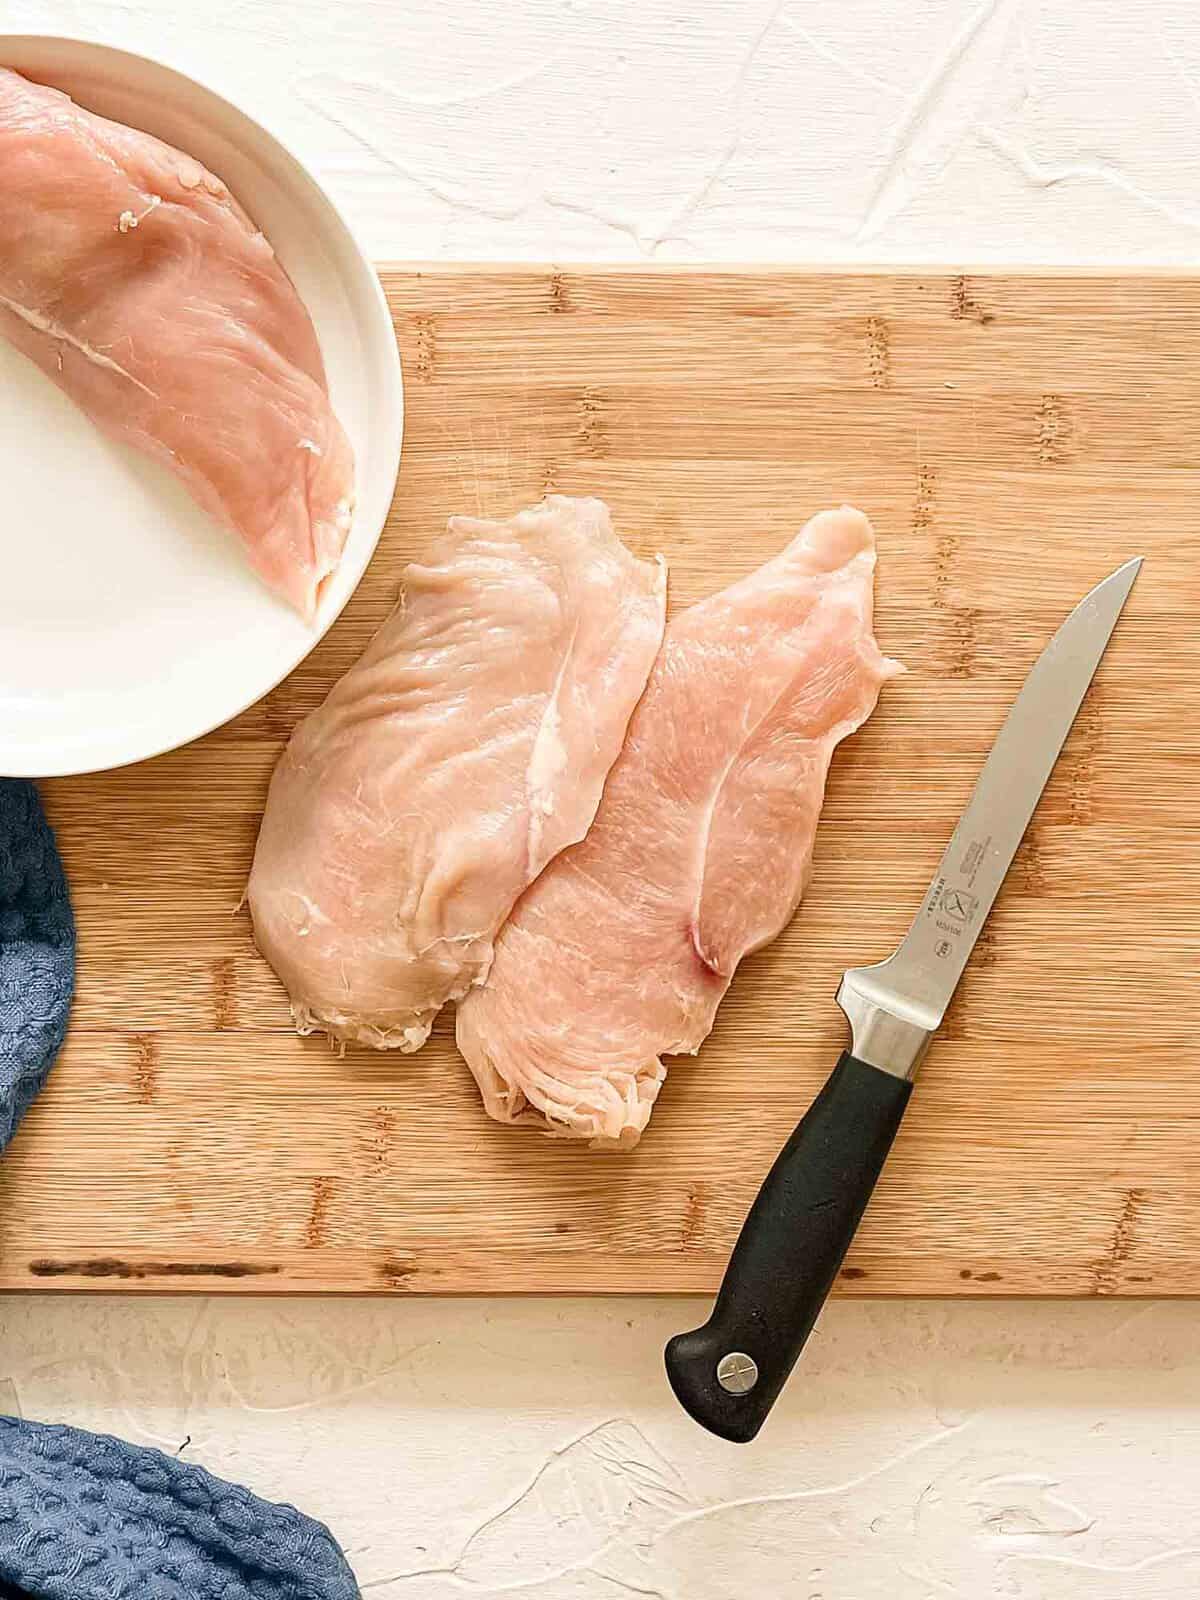 Raw chicken breast on cutting board with knife having been sliced in half lengthwise.